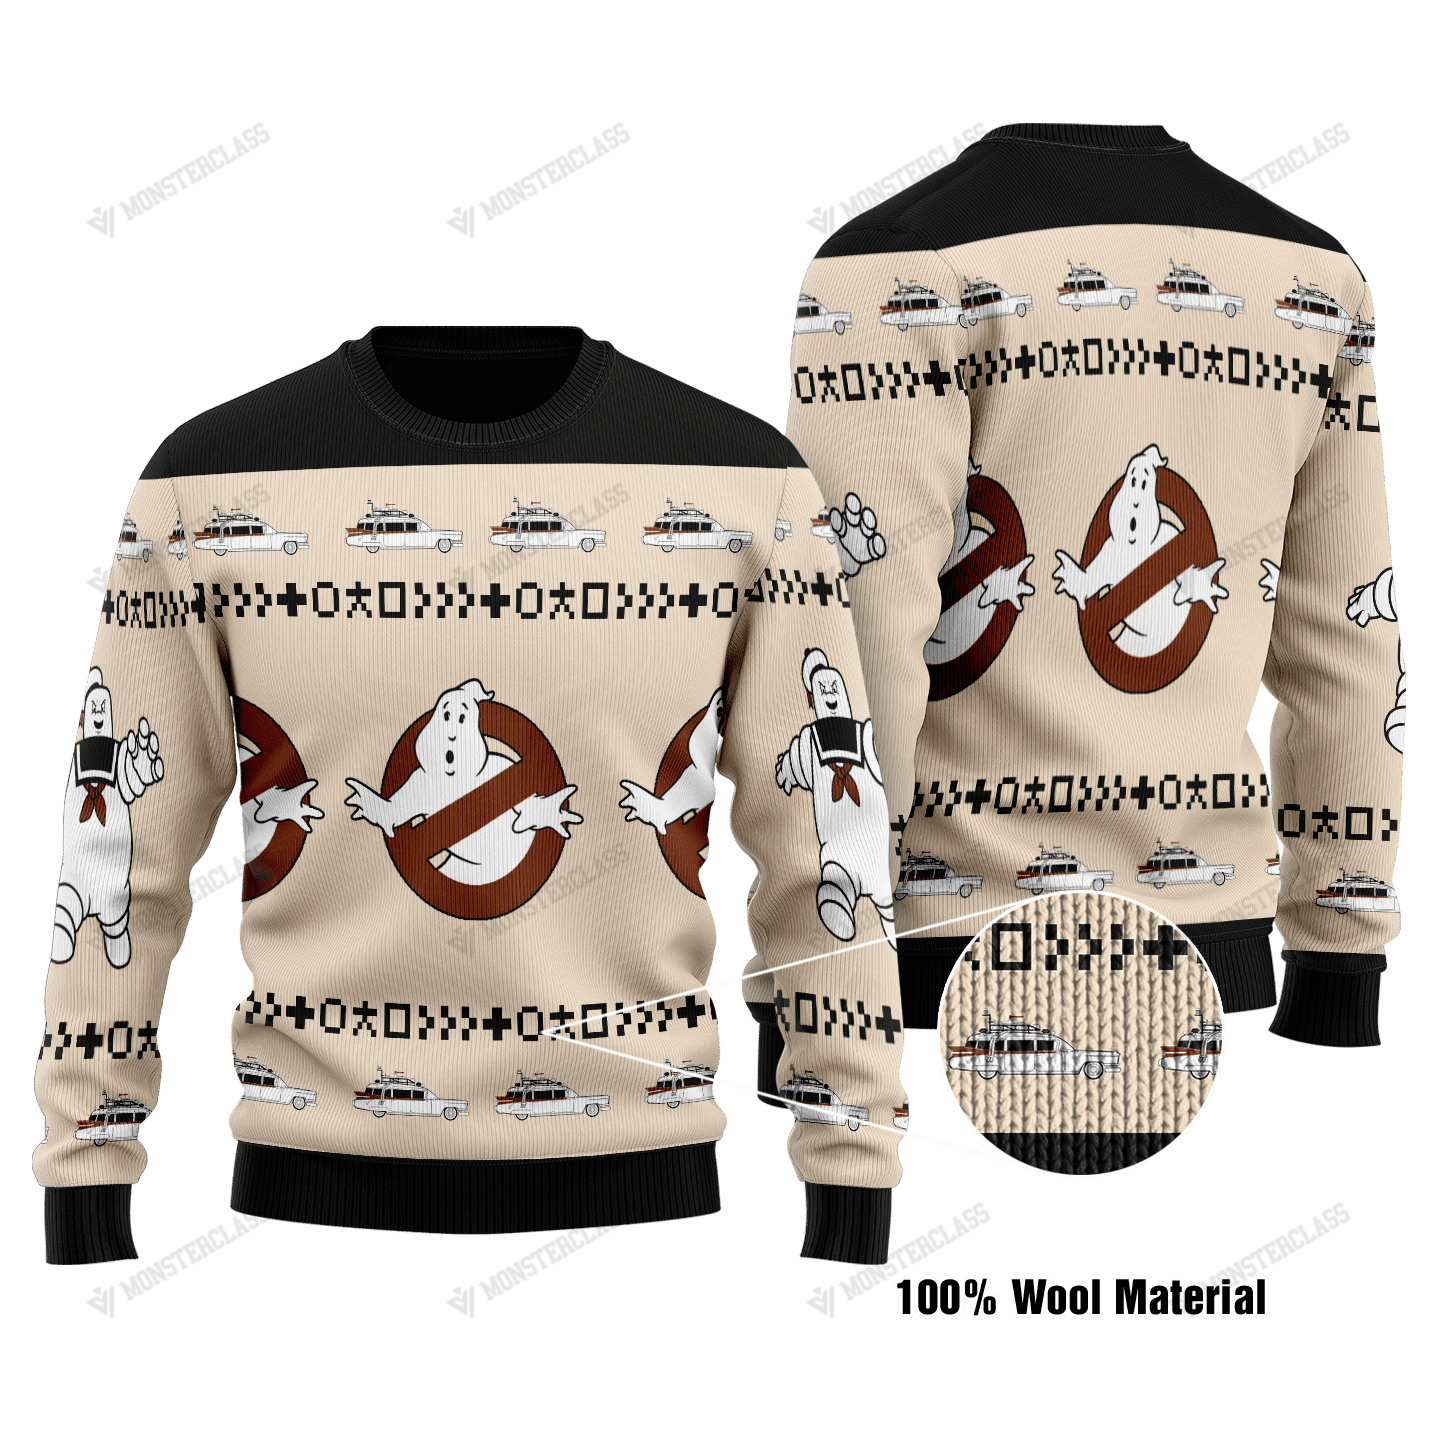 Ghostbusters christmas sweater